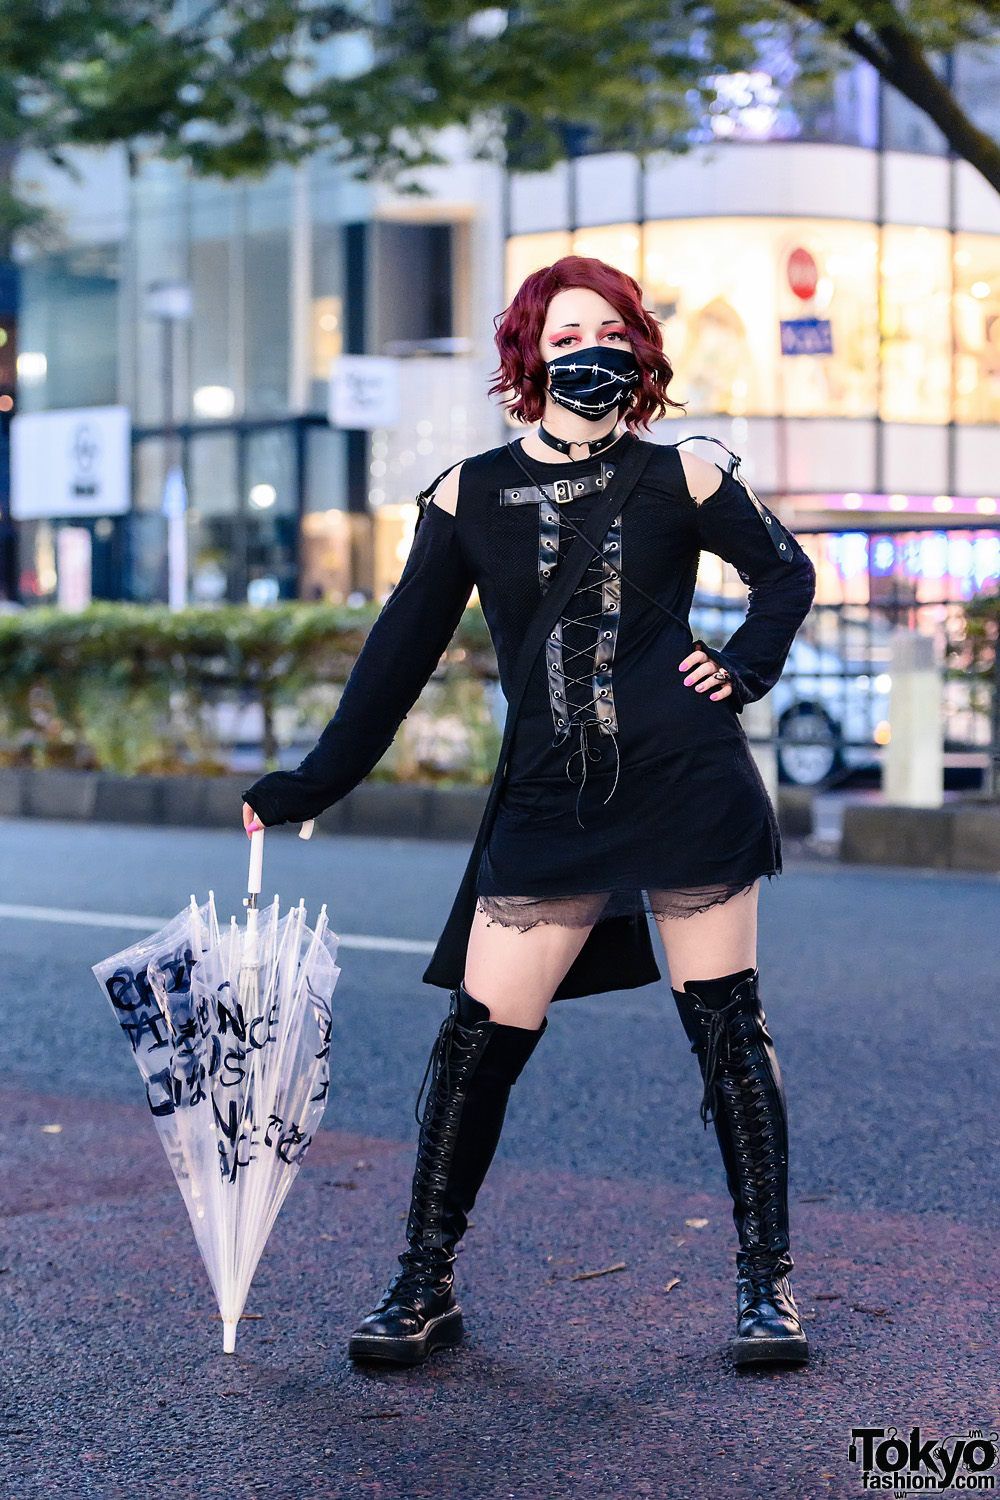 All Black Tokyo Street Style w/ Barb Wire Face Mask, Drug Honey Sweater Dress, Thank You Mart Bag, Black Lives Matter Umbrella & Thigh Boots